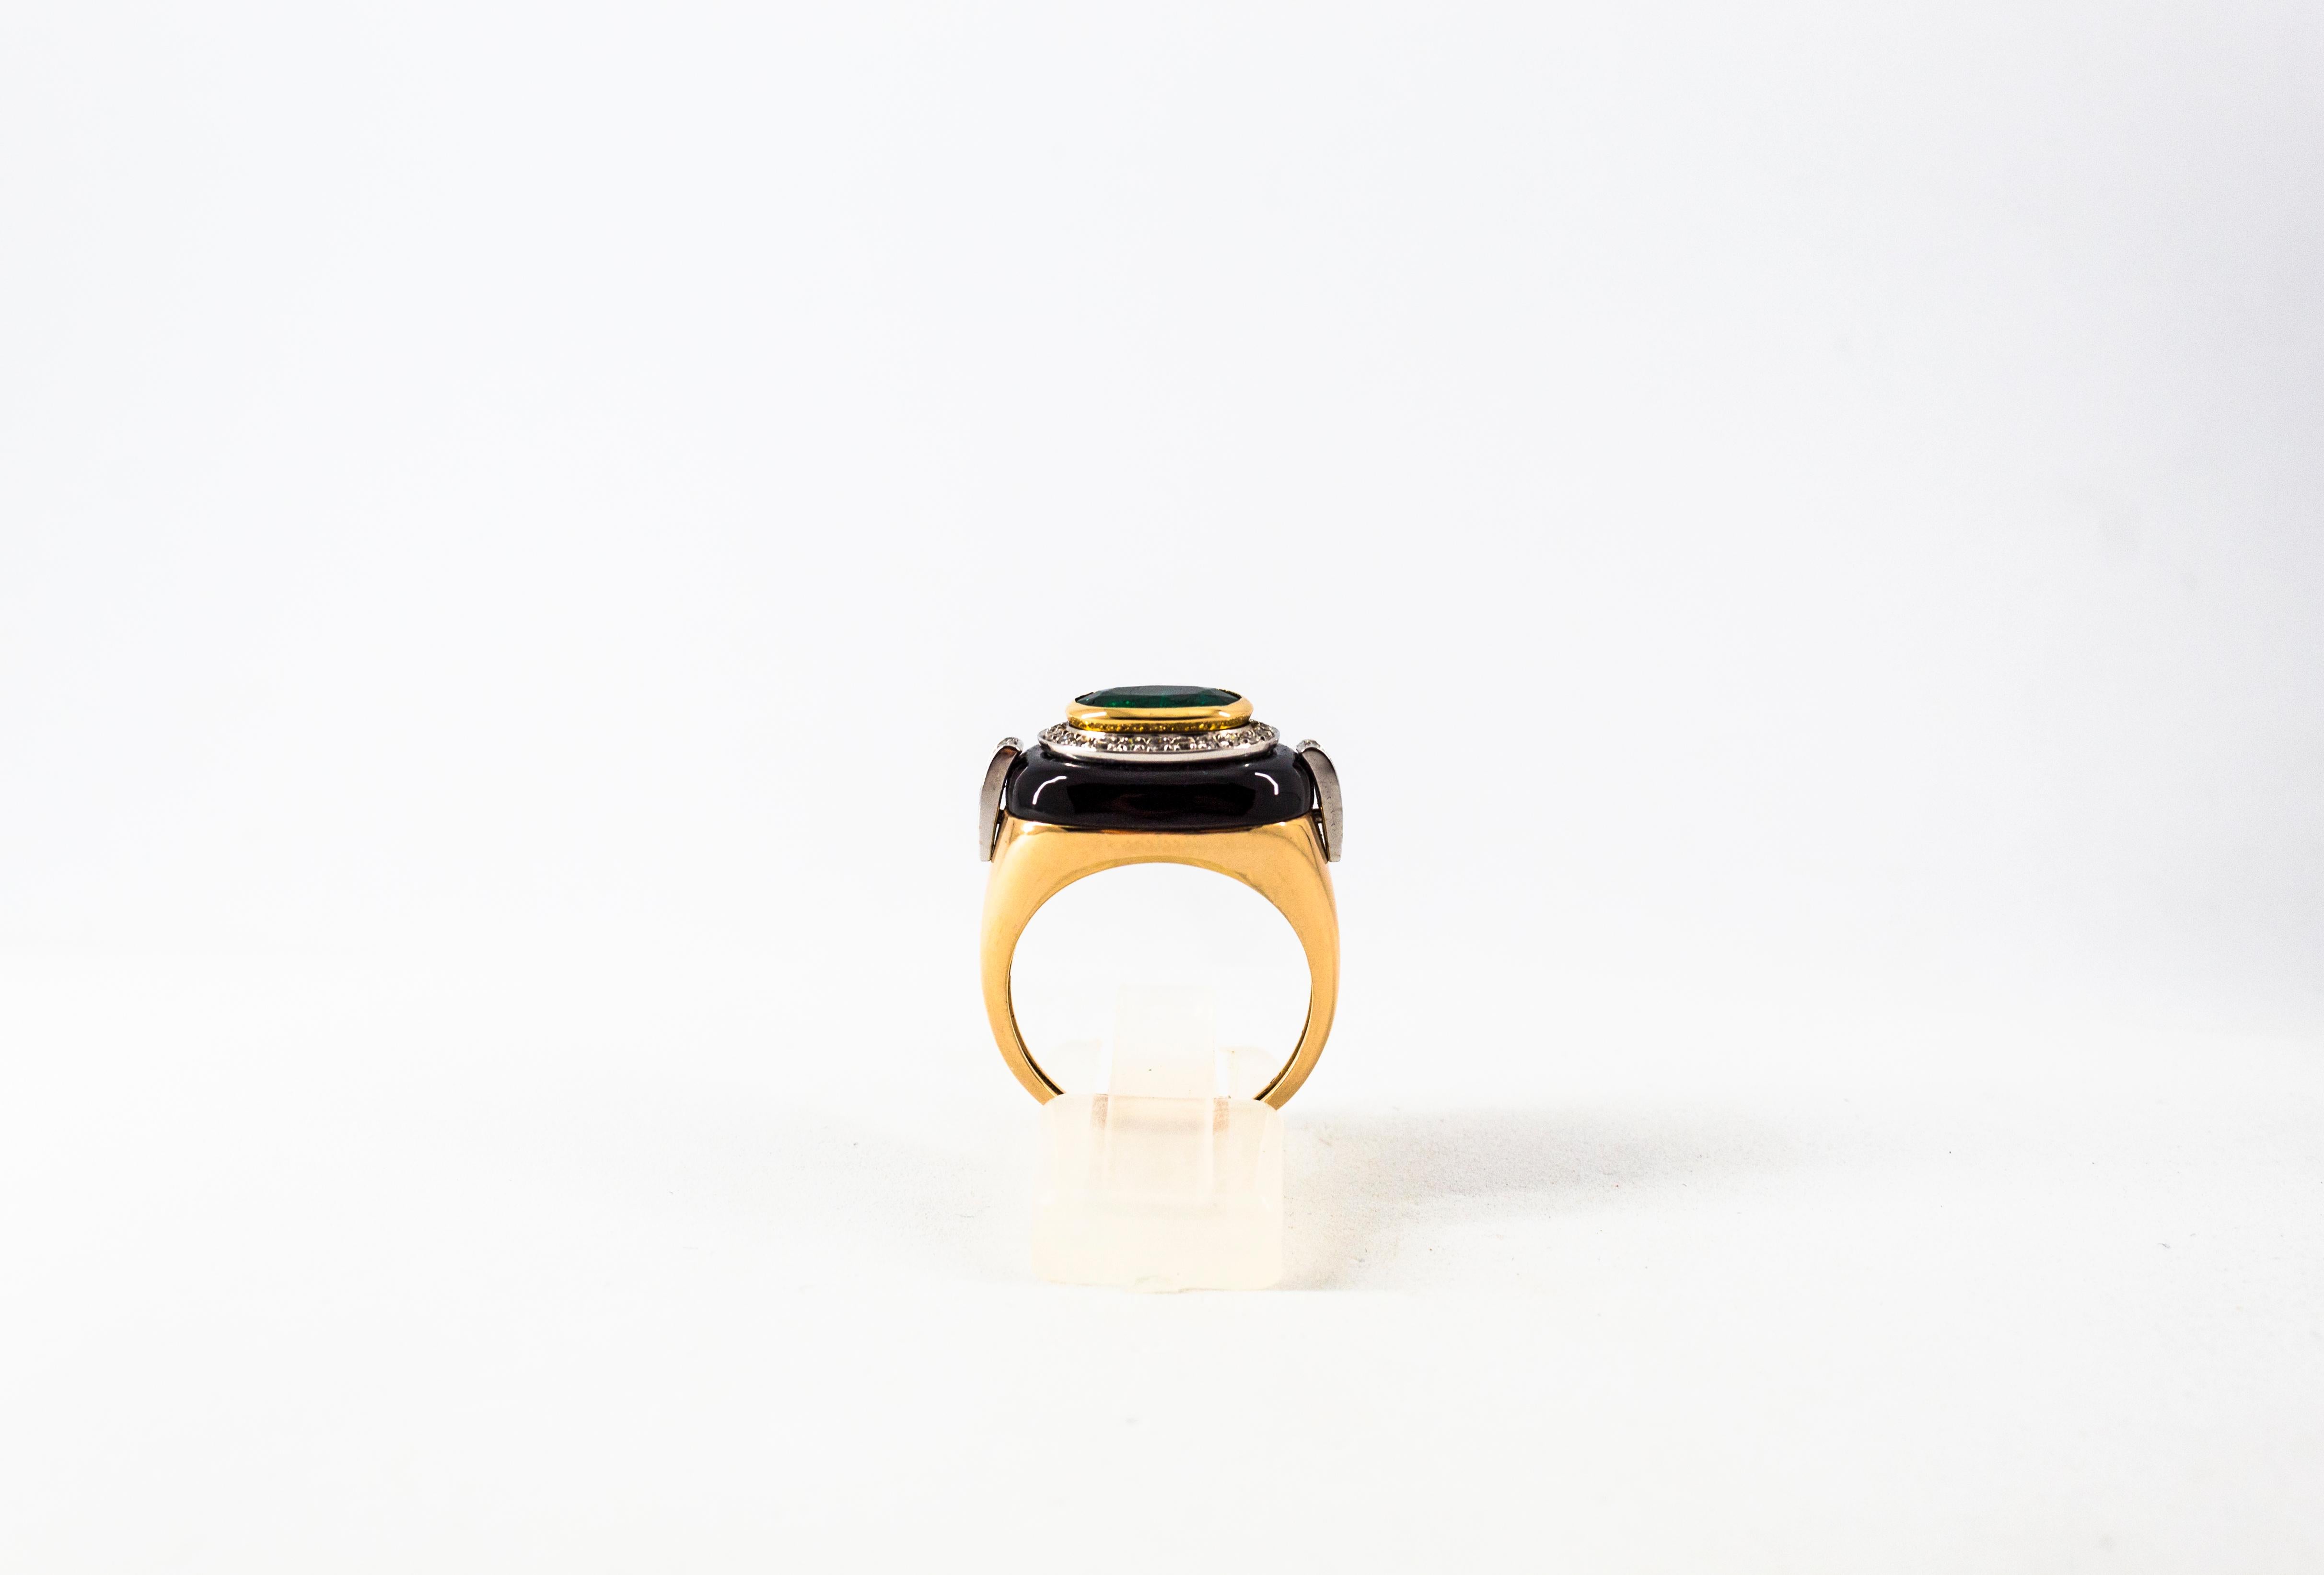 This Ring is made of 14K Yellow Gold.
This Ring has 0.40 Carats of White Diamonds.
This Ring has a 1.85 Carats Natural Zambia Emerald.
This Ring has Onyx.
This Ring is inspired by Renaissance Style and it is available also with Turquoise and